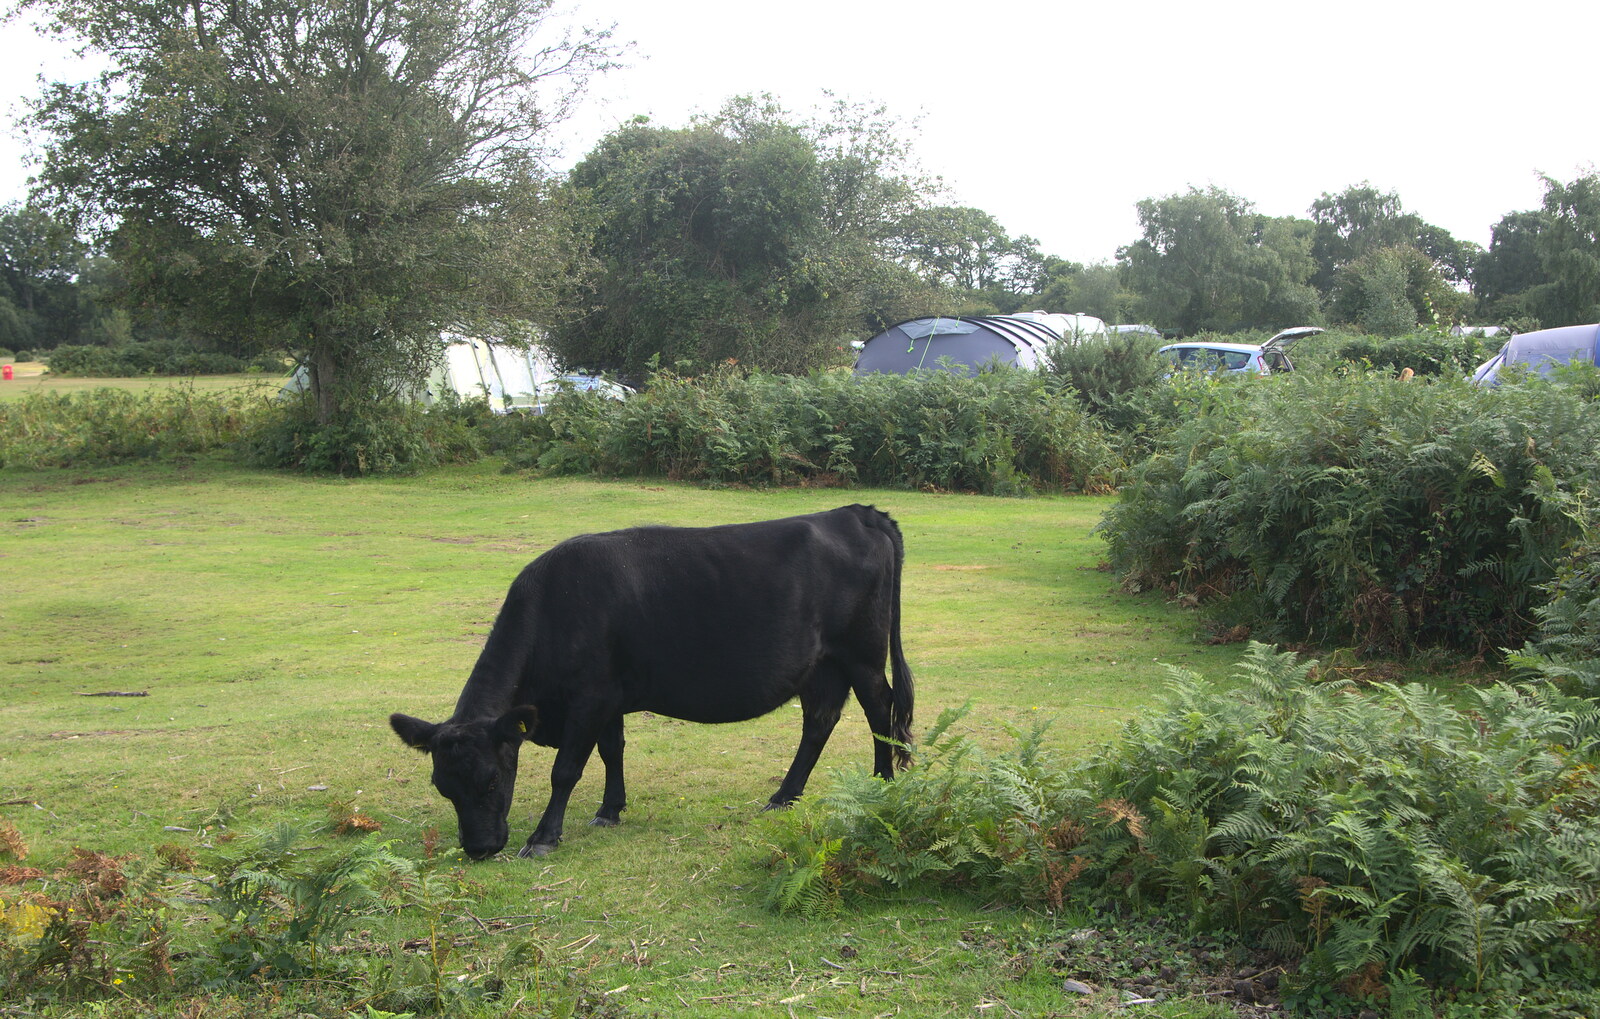 A black cow munches on grass from Camping at Roundhills, Brockenhurst, New Forest, Hampshire - 29th August 2015